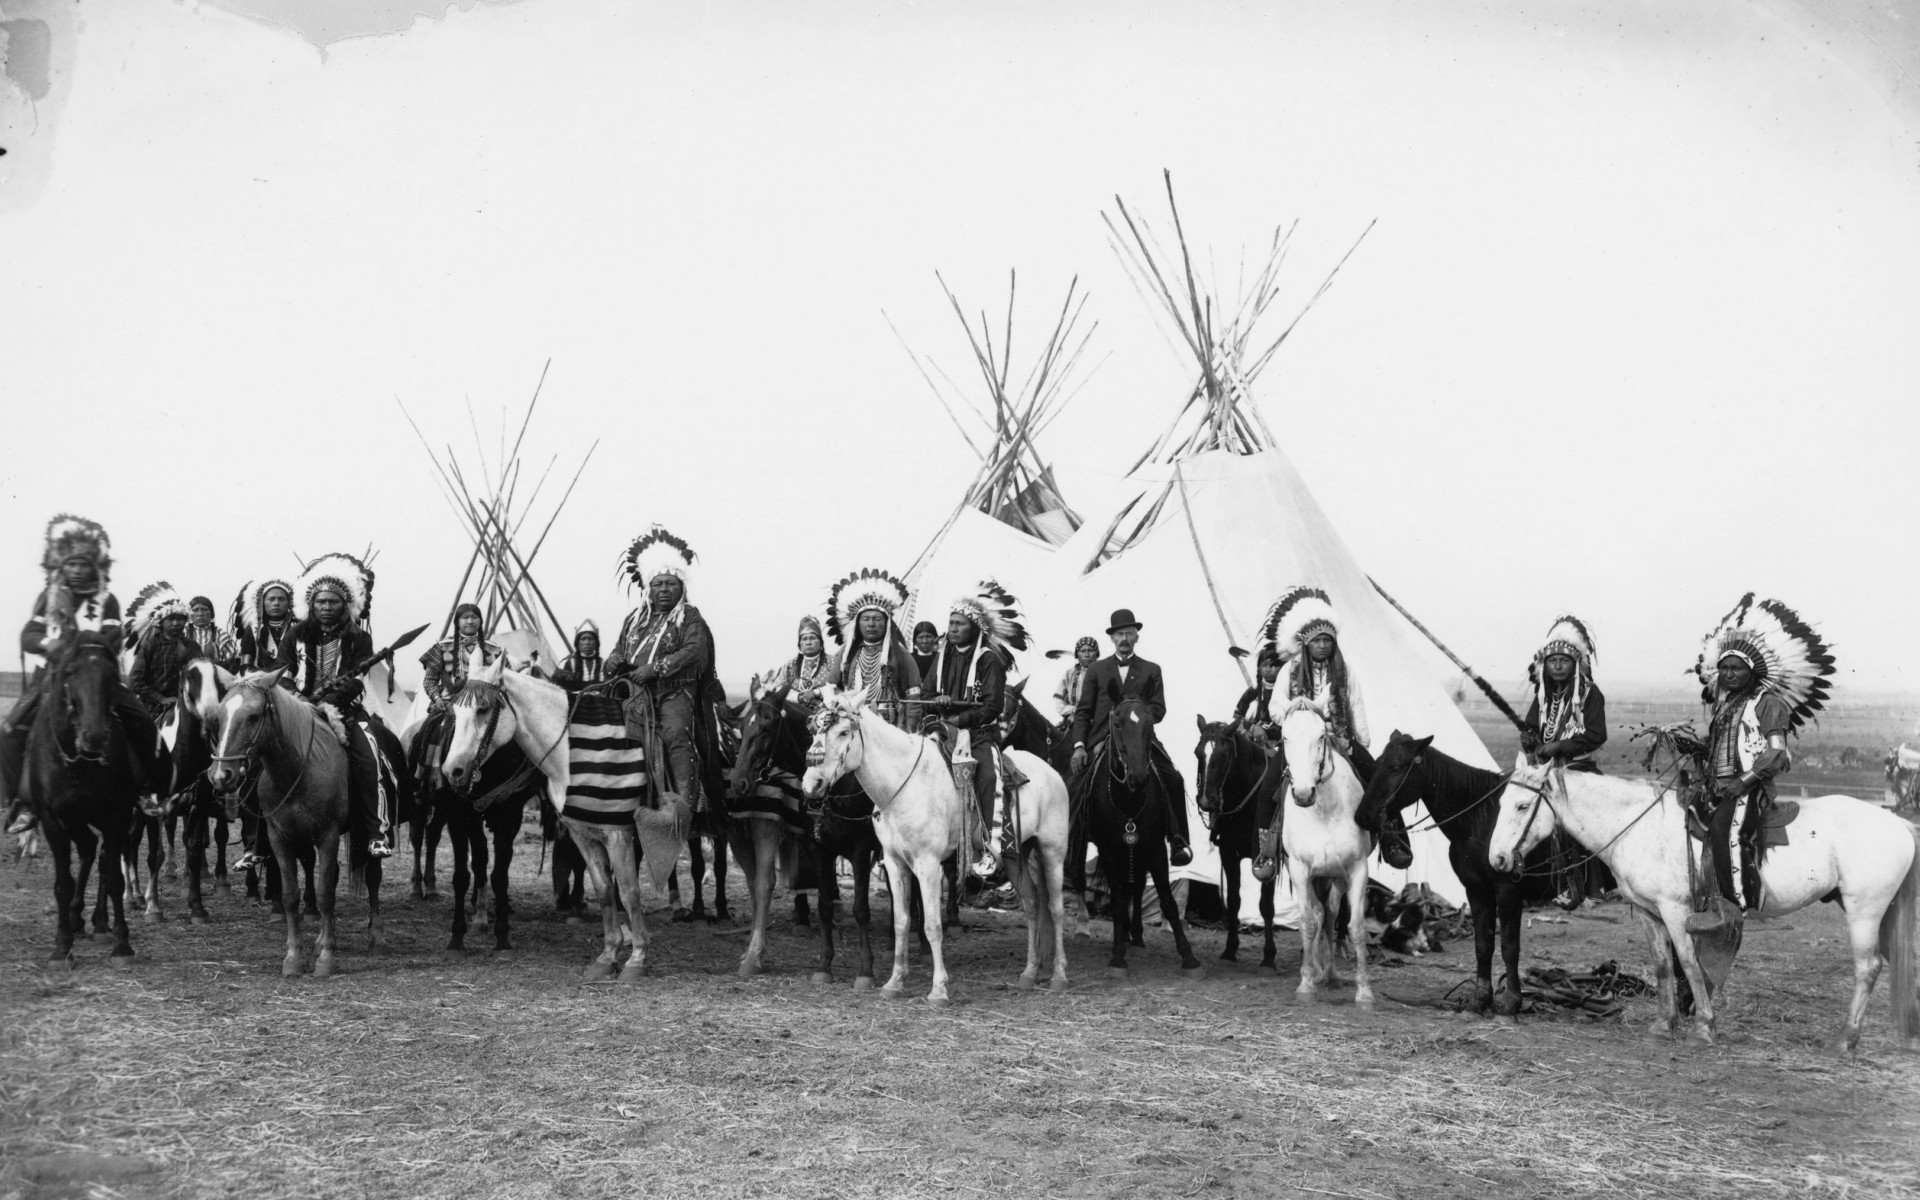  black white native american people crowd history wallpaper background